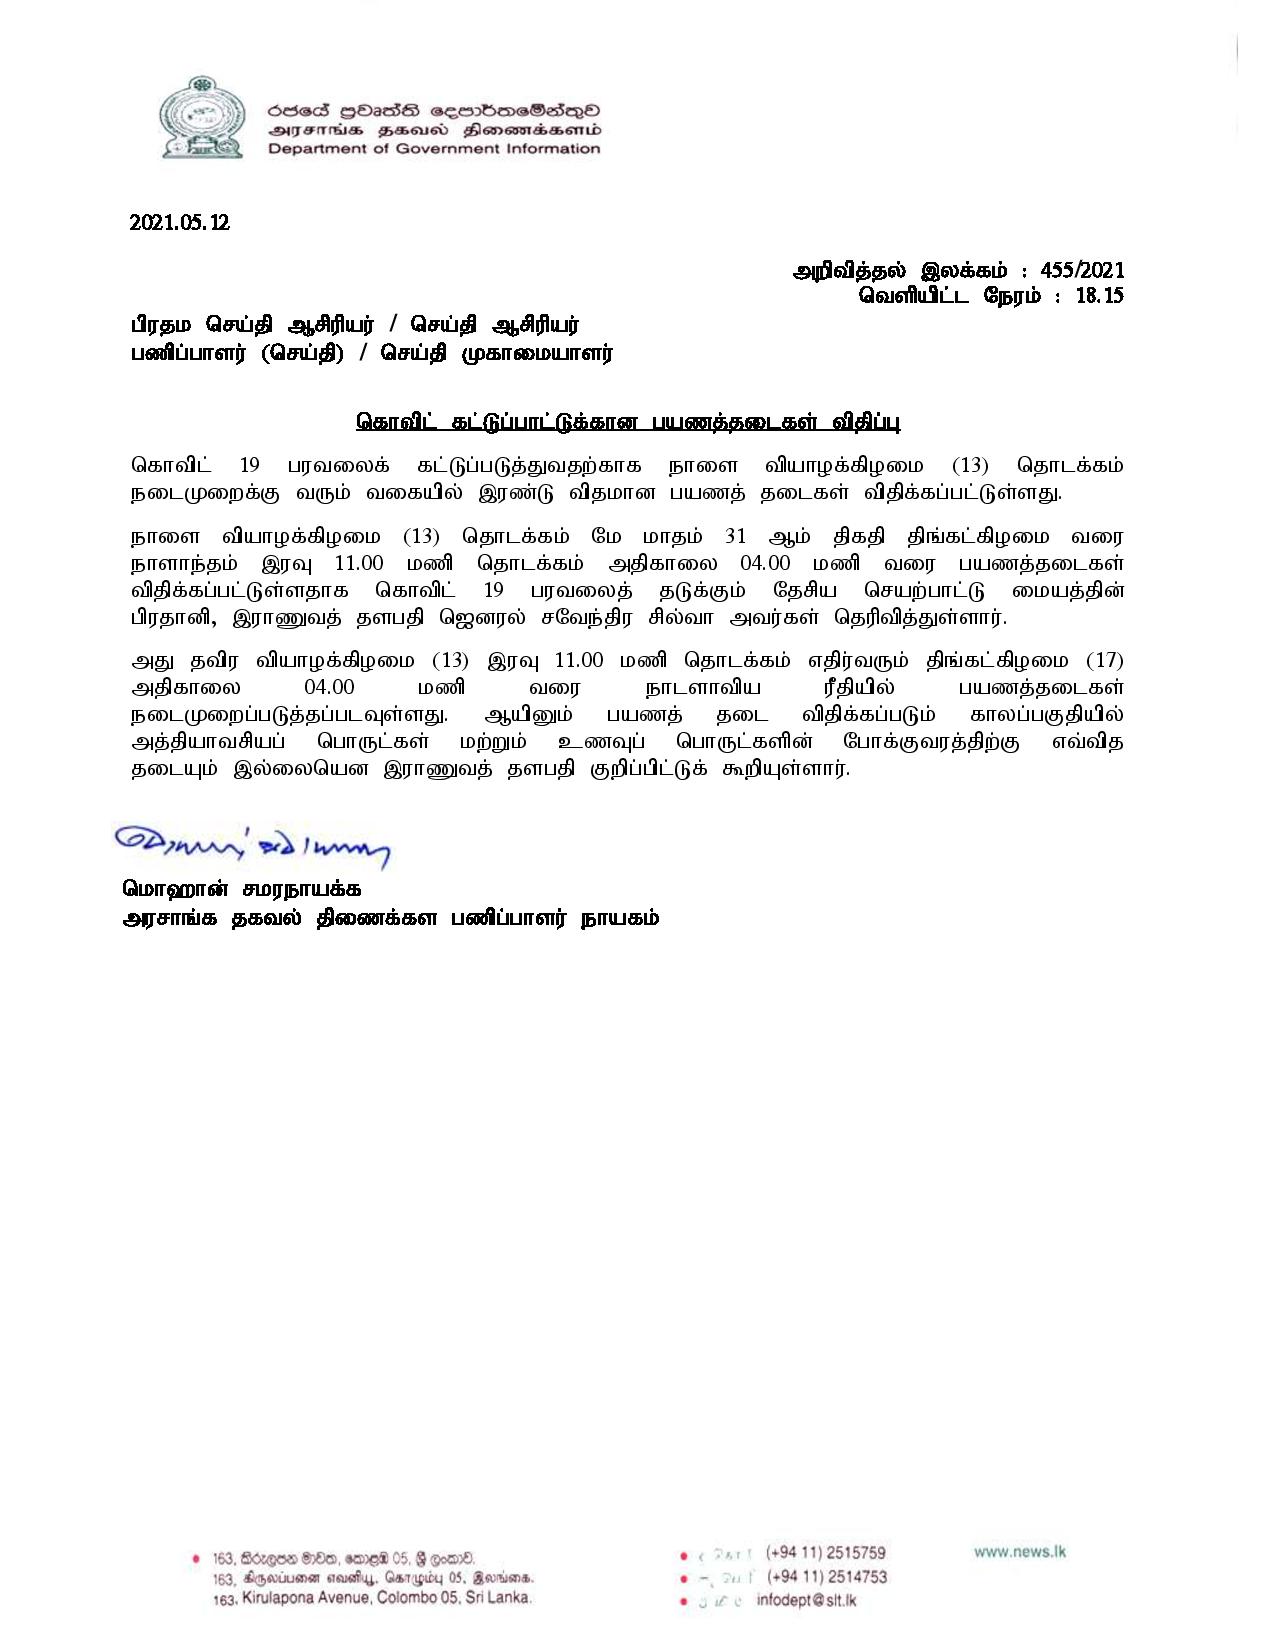 Release No 455 Tamil page 001